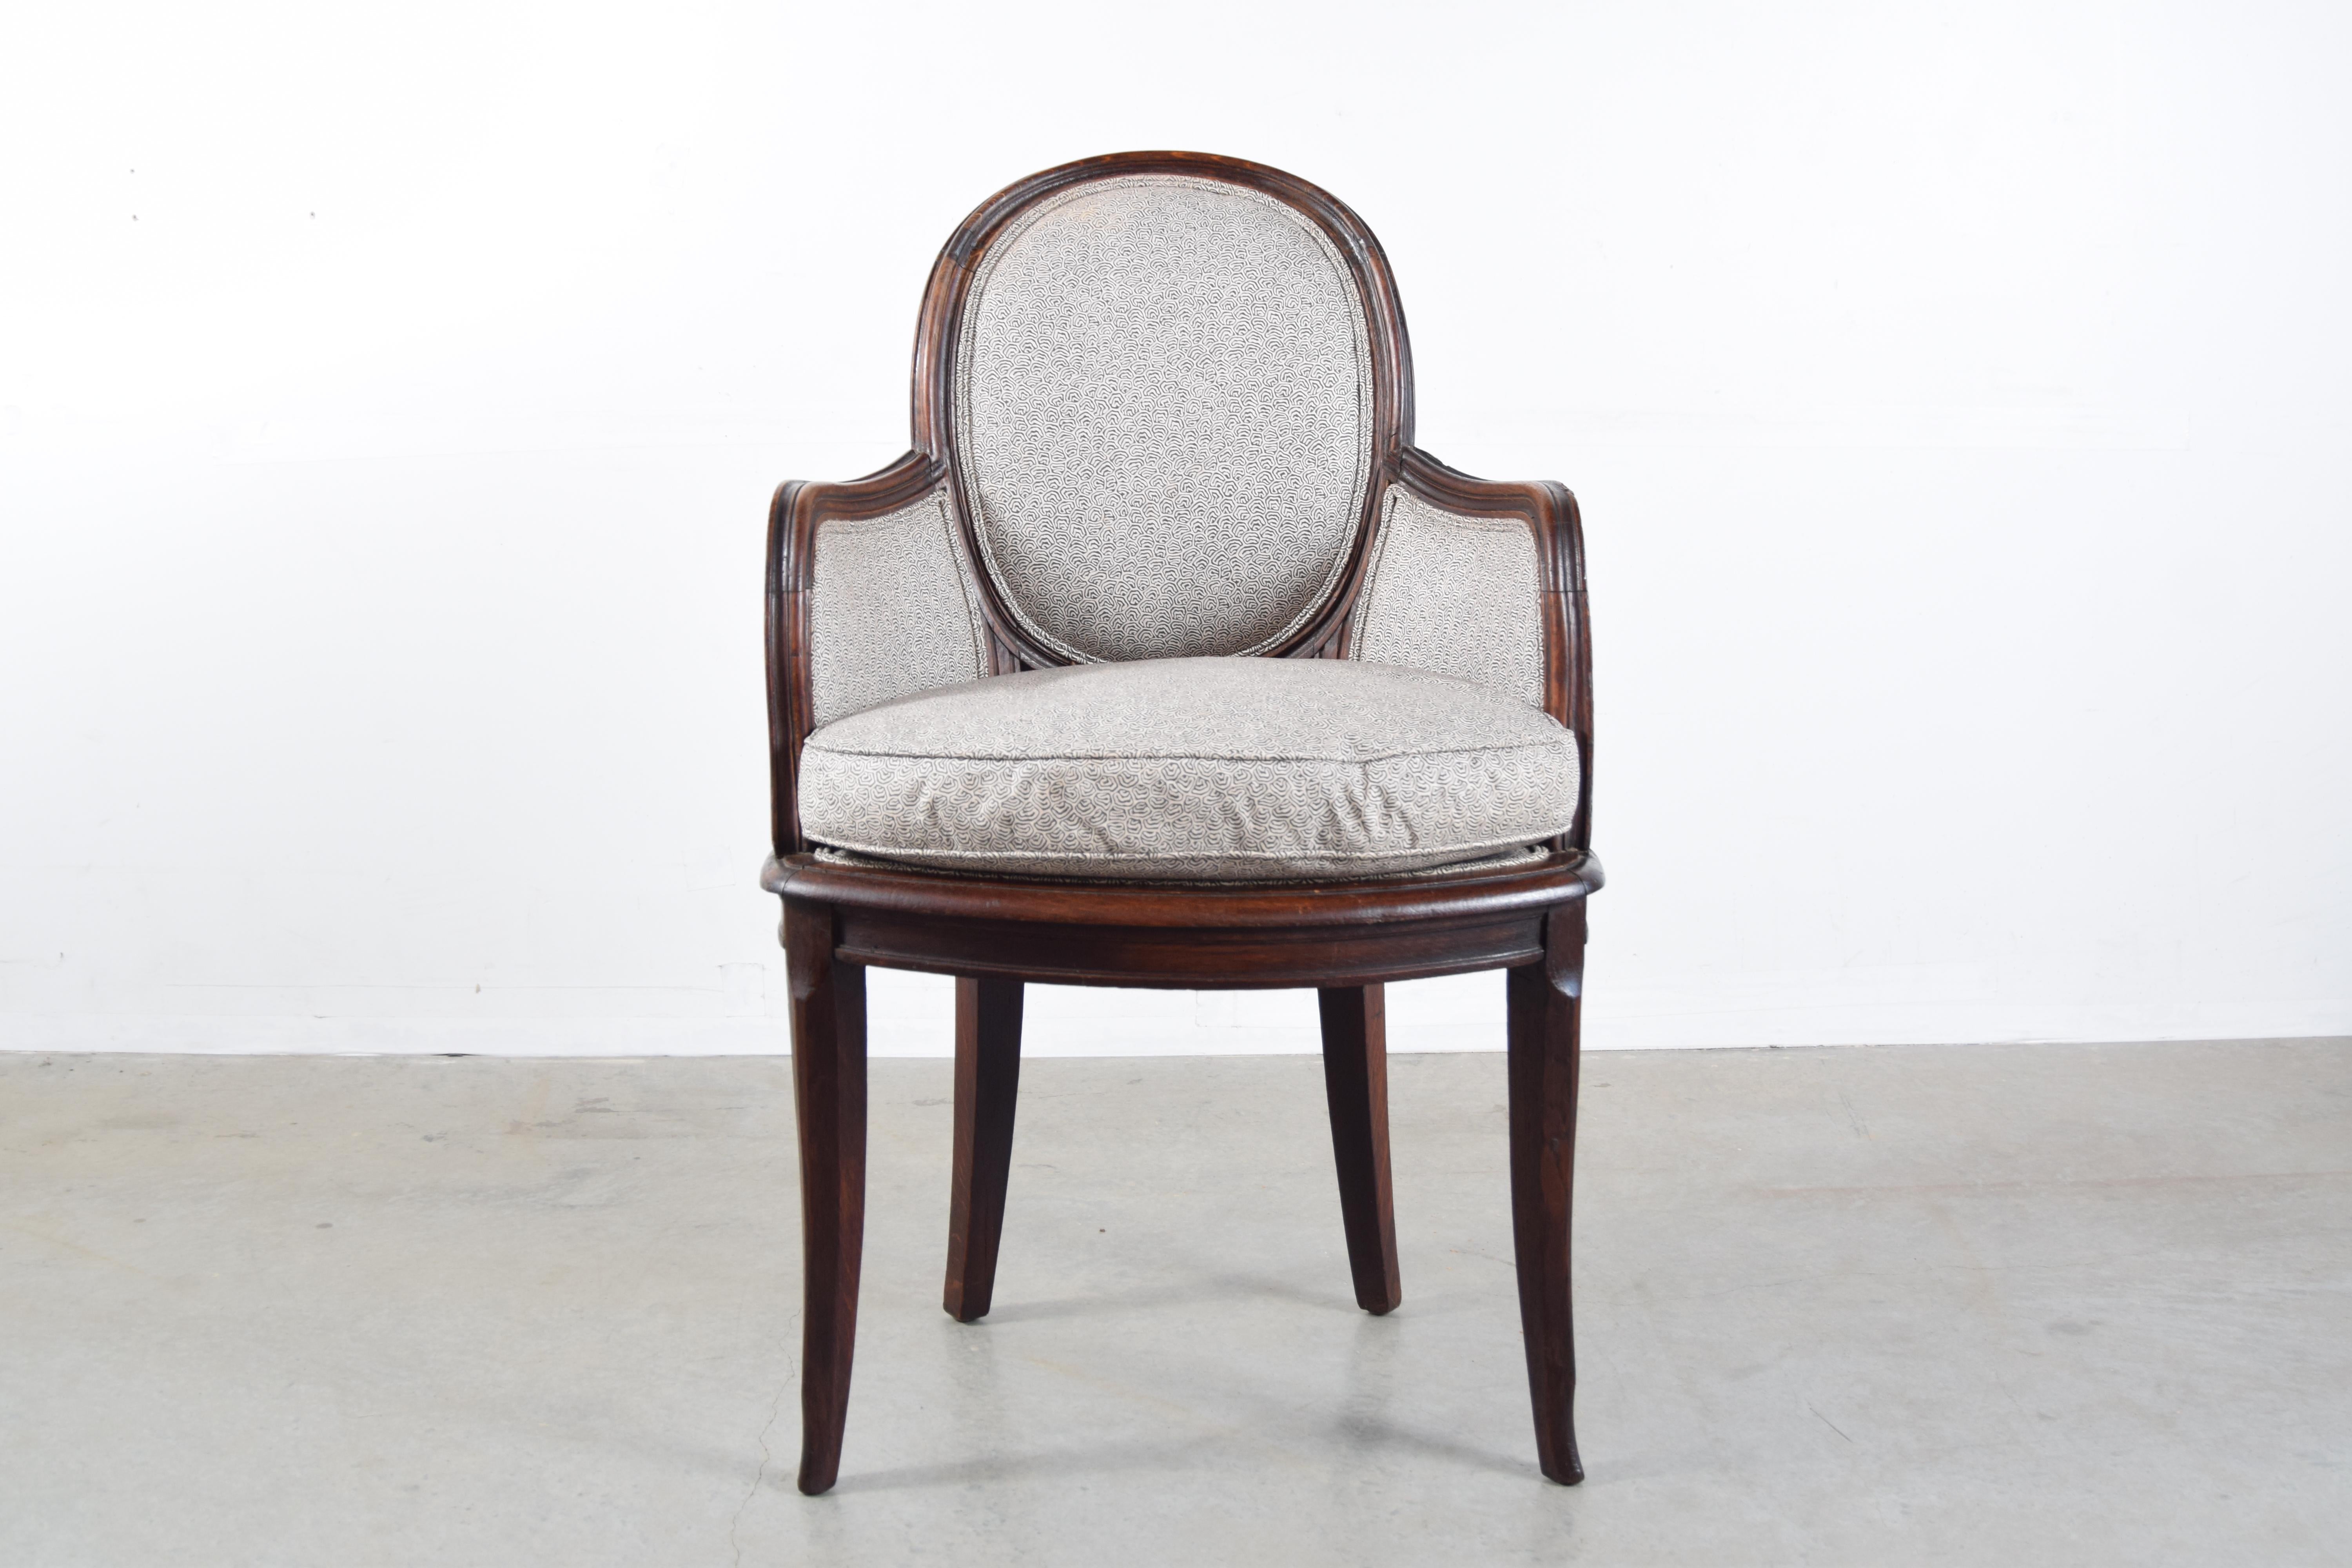 Art Nouveau armchair in oak, circa 1895 - 1910, France. Chair appears to have been re-upholstered within the past 10 years. Measures: 38 1/4